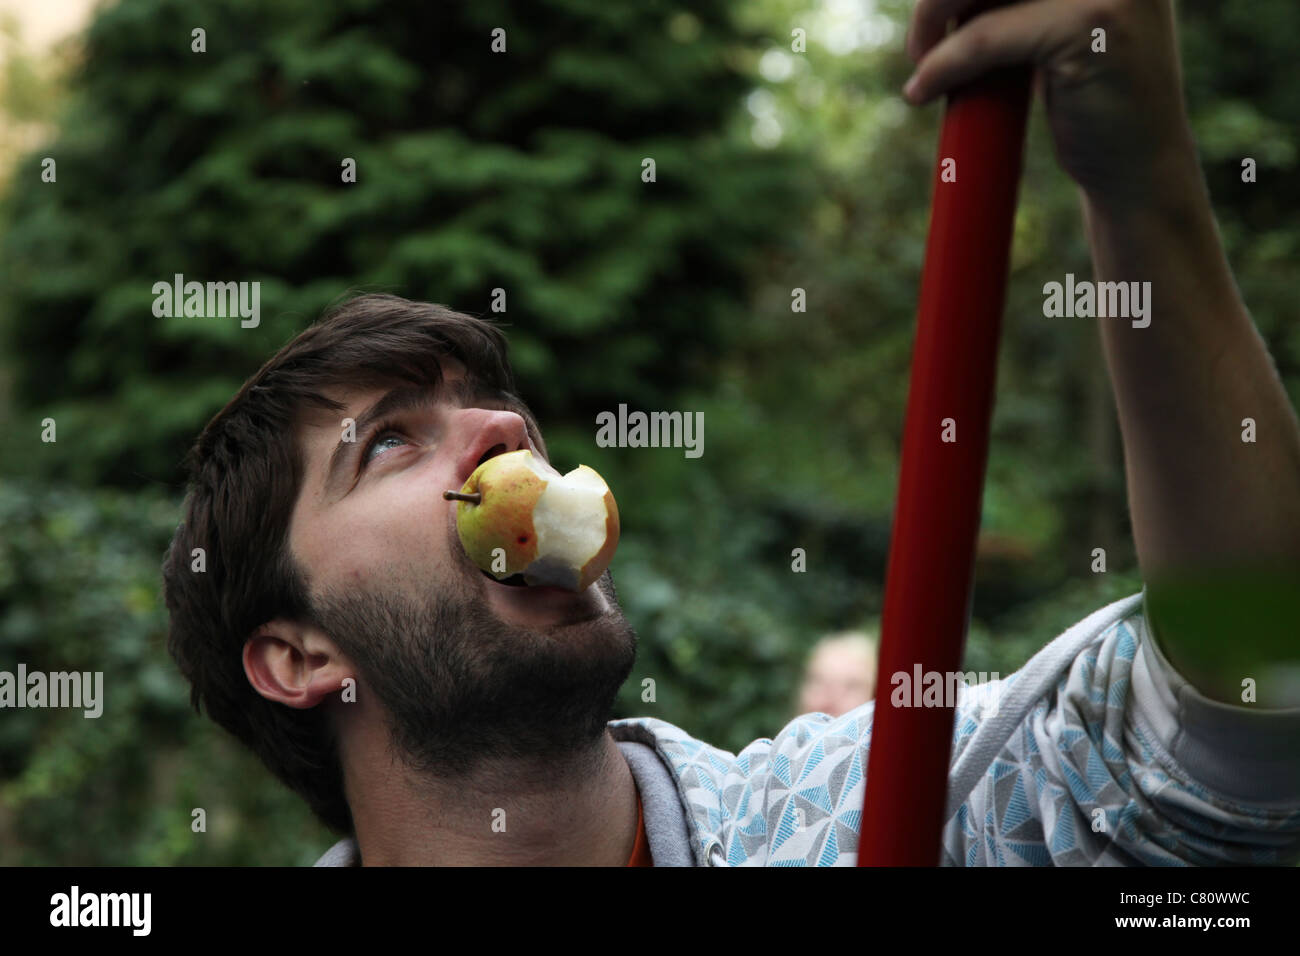 A man harvesting fruit with an apple picker Stock Photo